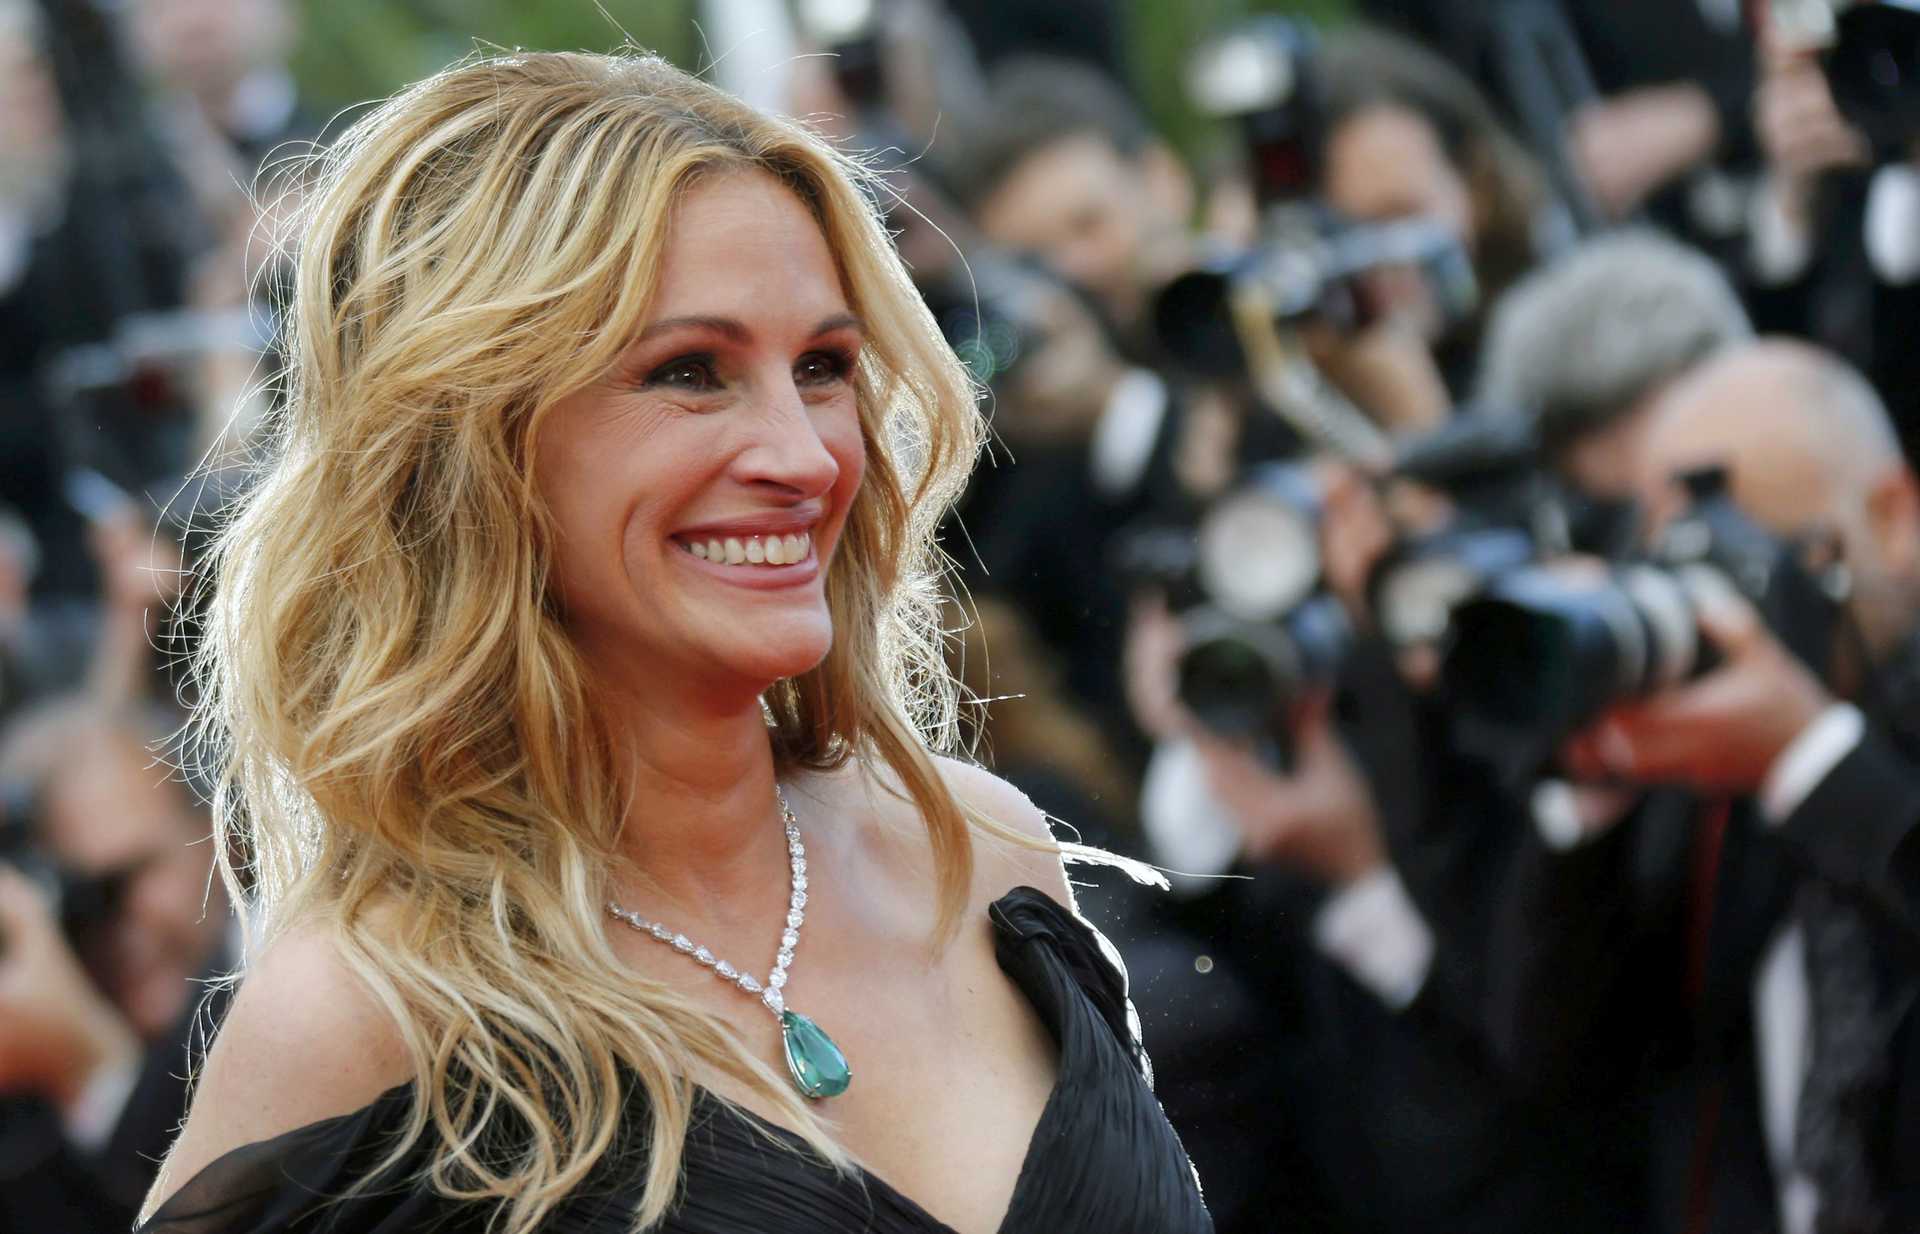 Cast member Julia Roberts arrives for the screening of the film “Money Monster” out of competition at the 69th Cannes Film Festival in Cannes